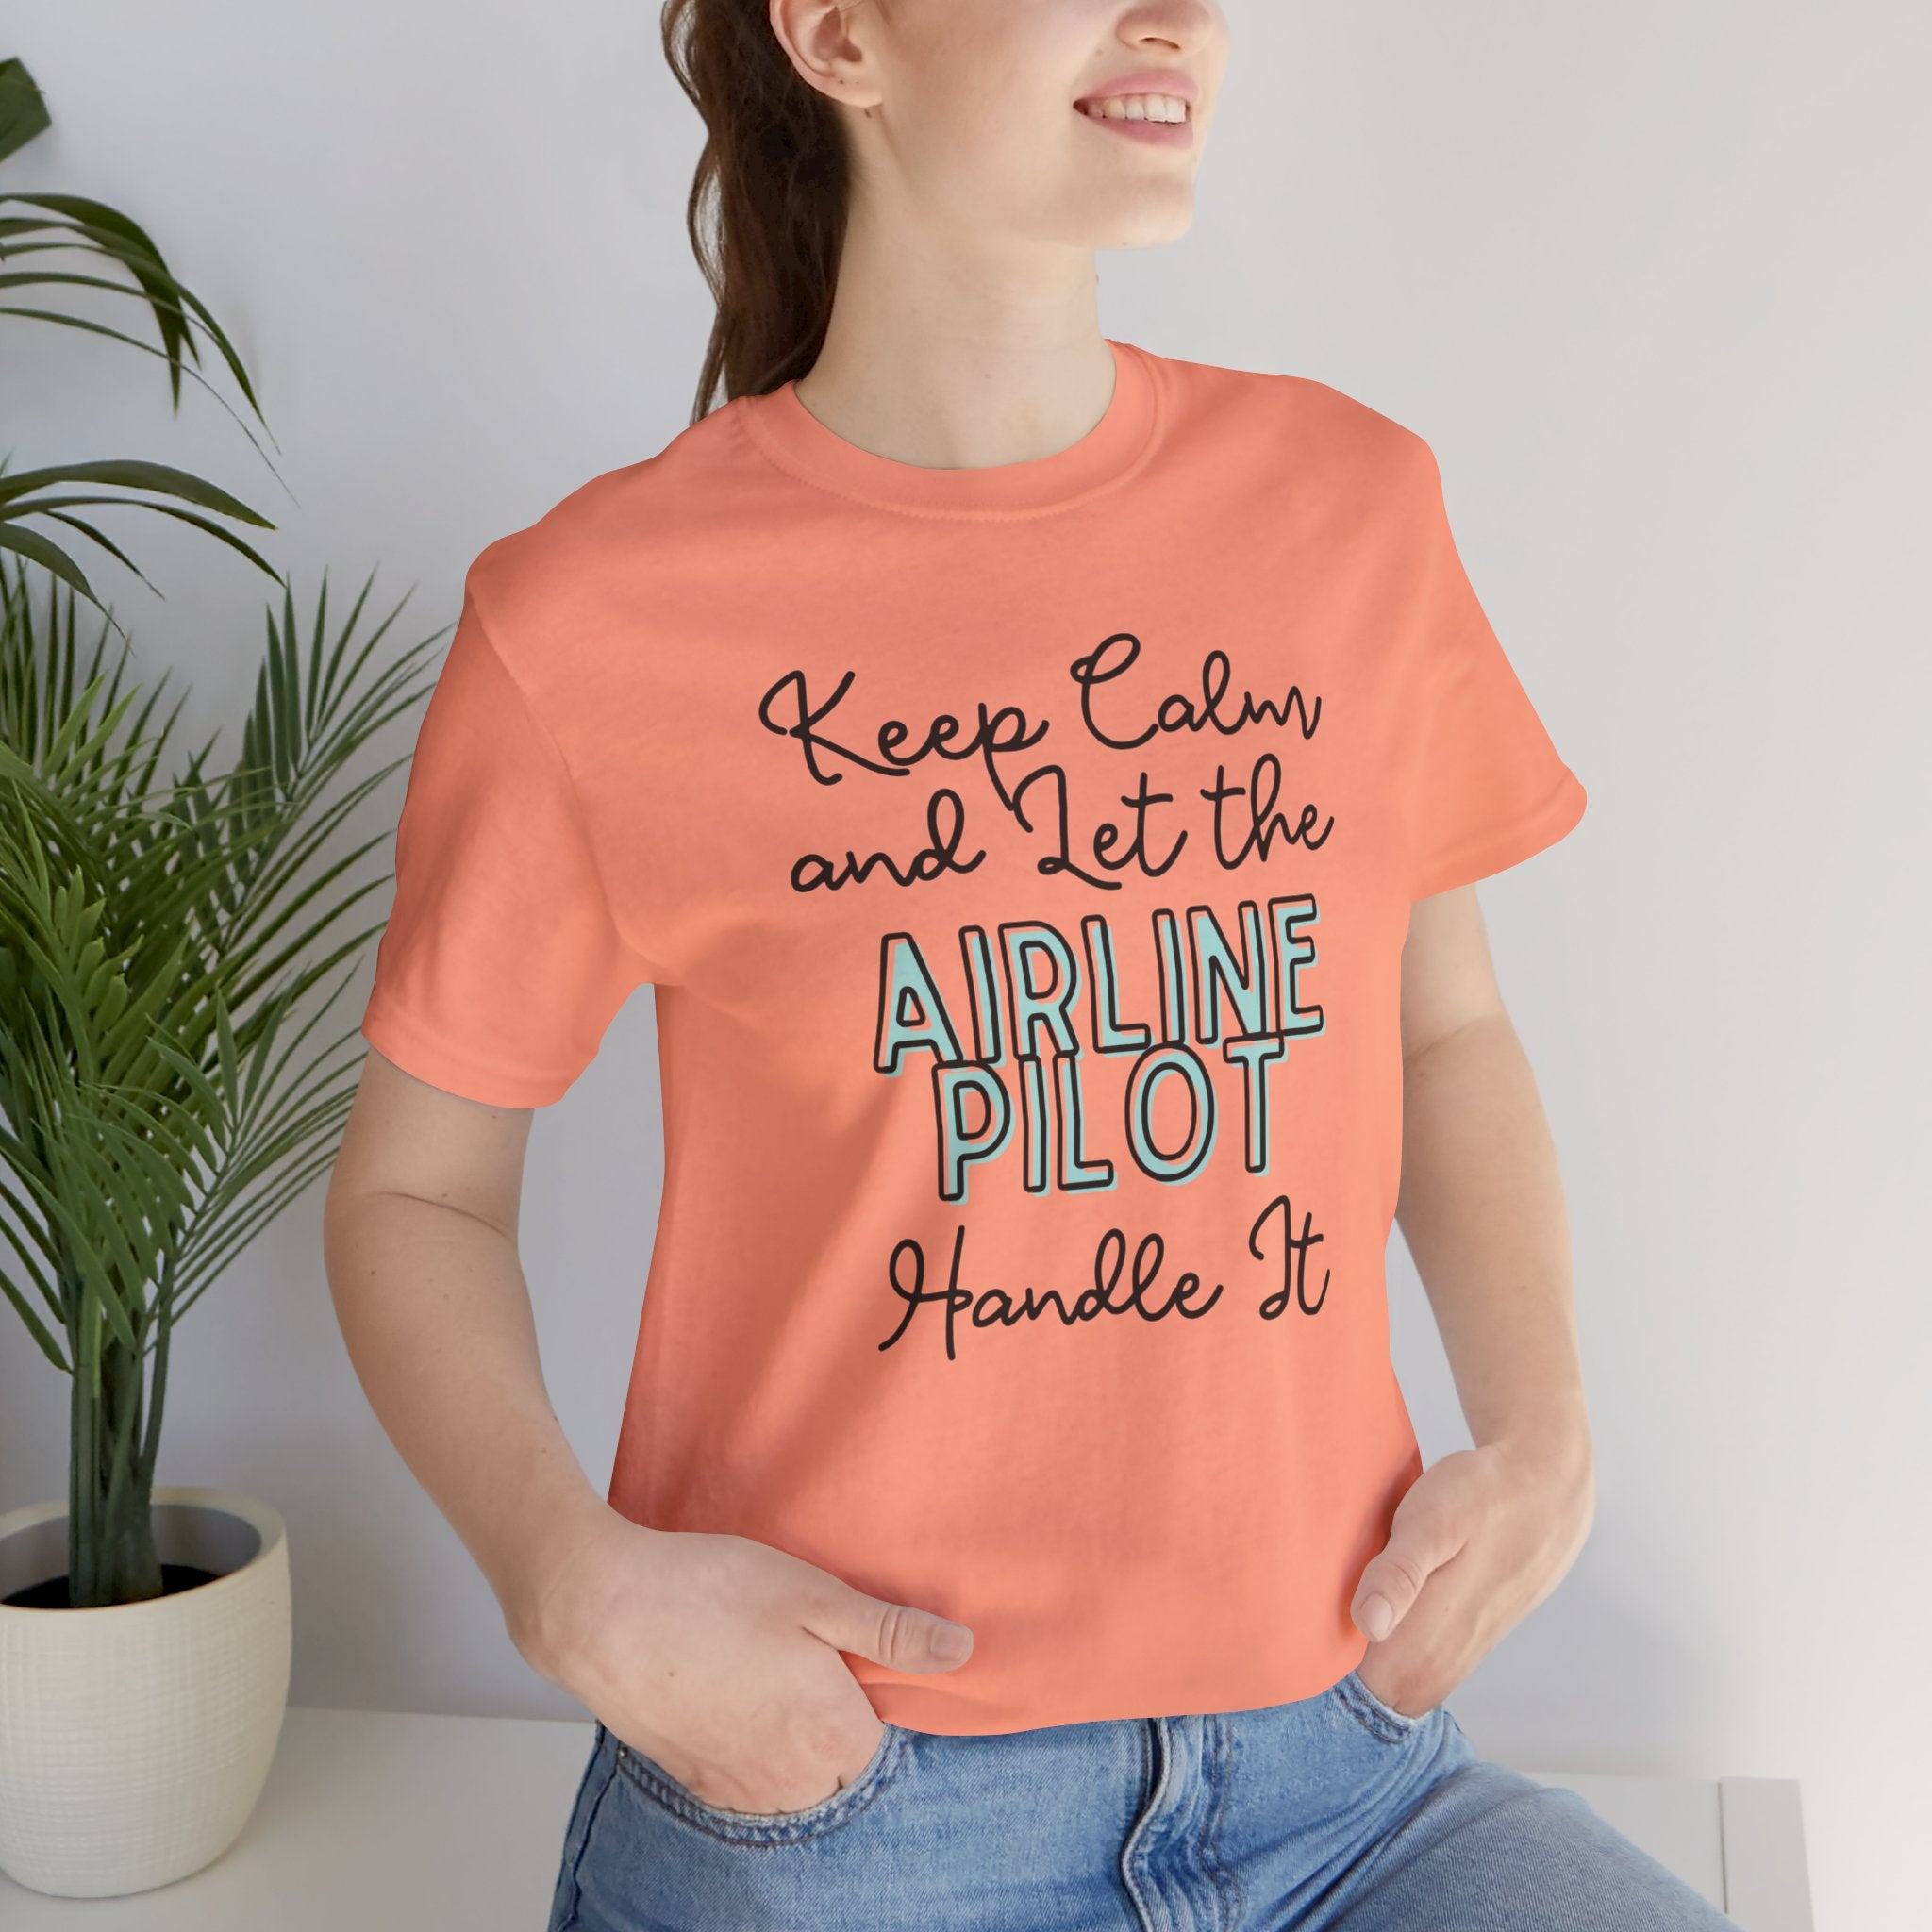 Keep Calm and let the Airline Pilot handle It - Jersey Short Sleeve Tee